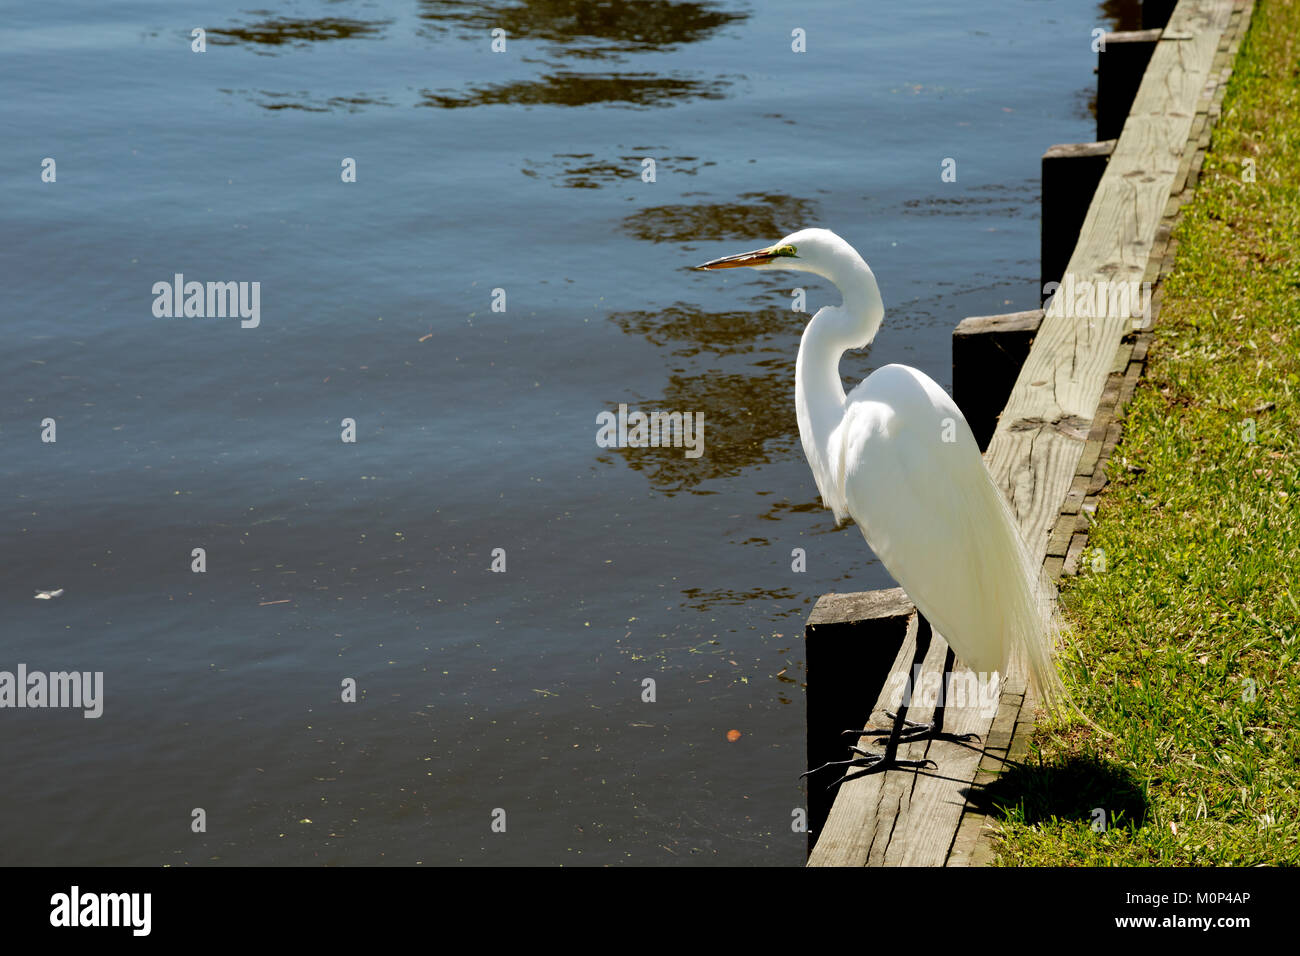 NC01405-00...NORTH CAROLINA - A Great White Heron fishing in the boat house pond at the Whalehead Club on the Outer Banks at Corrola. Stock Photo